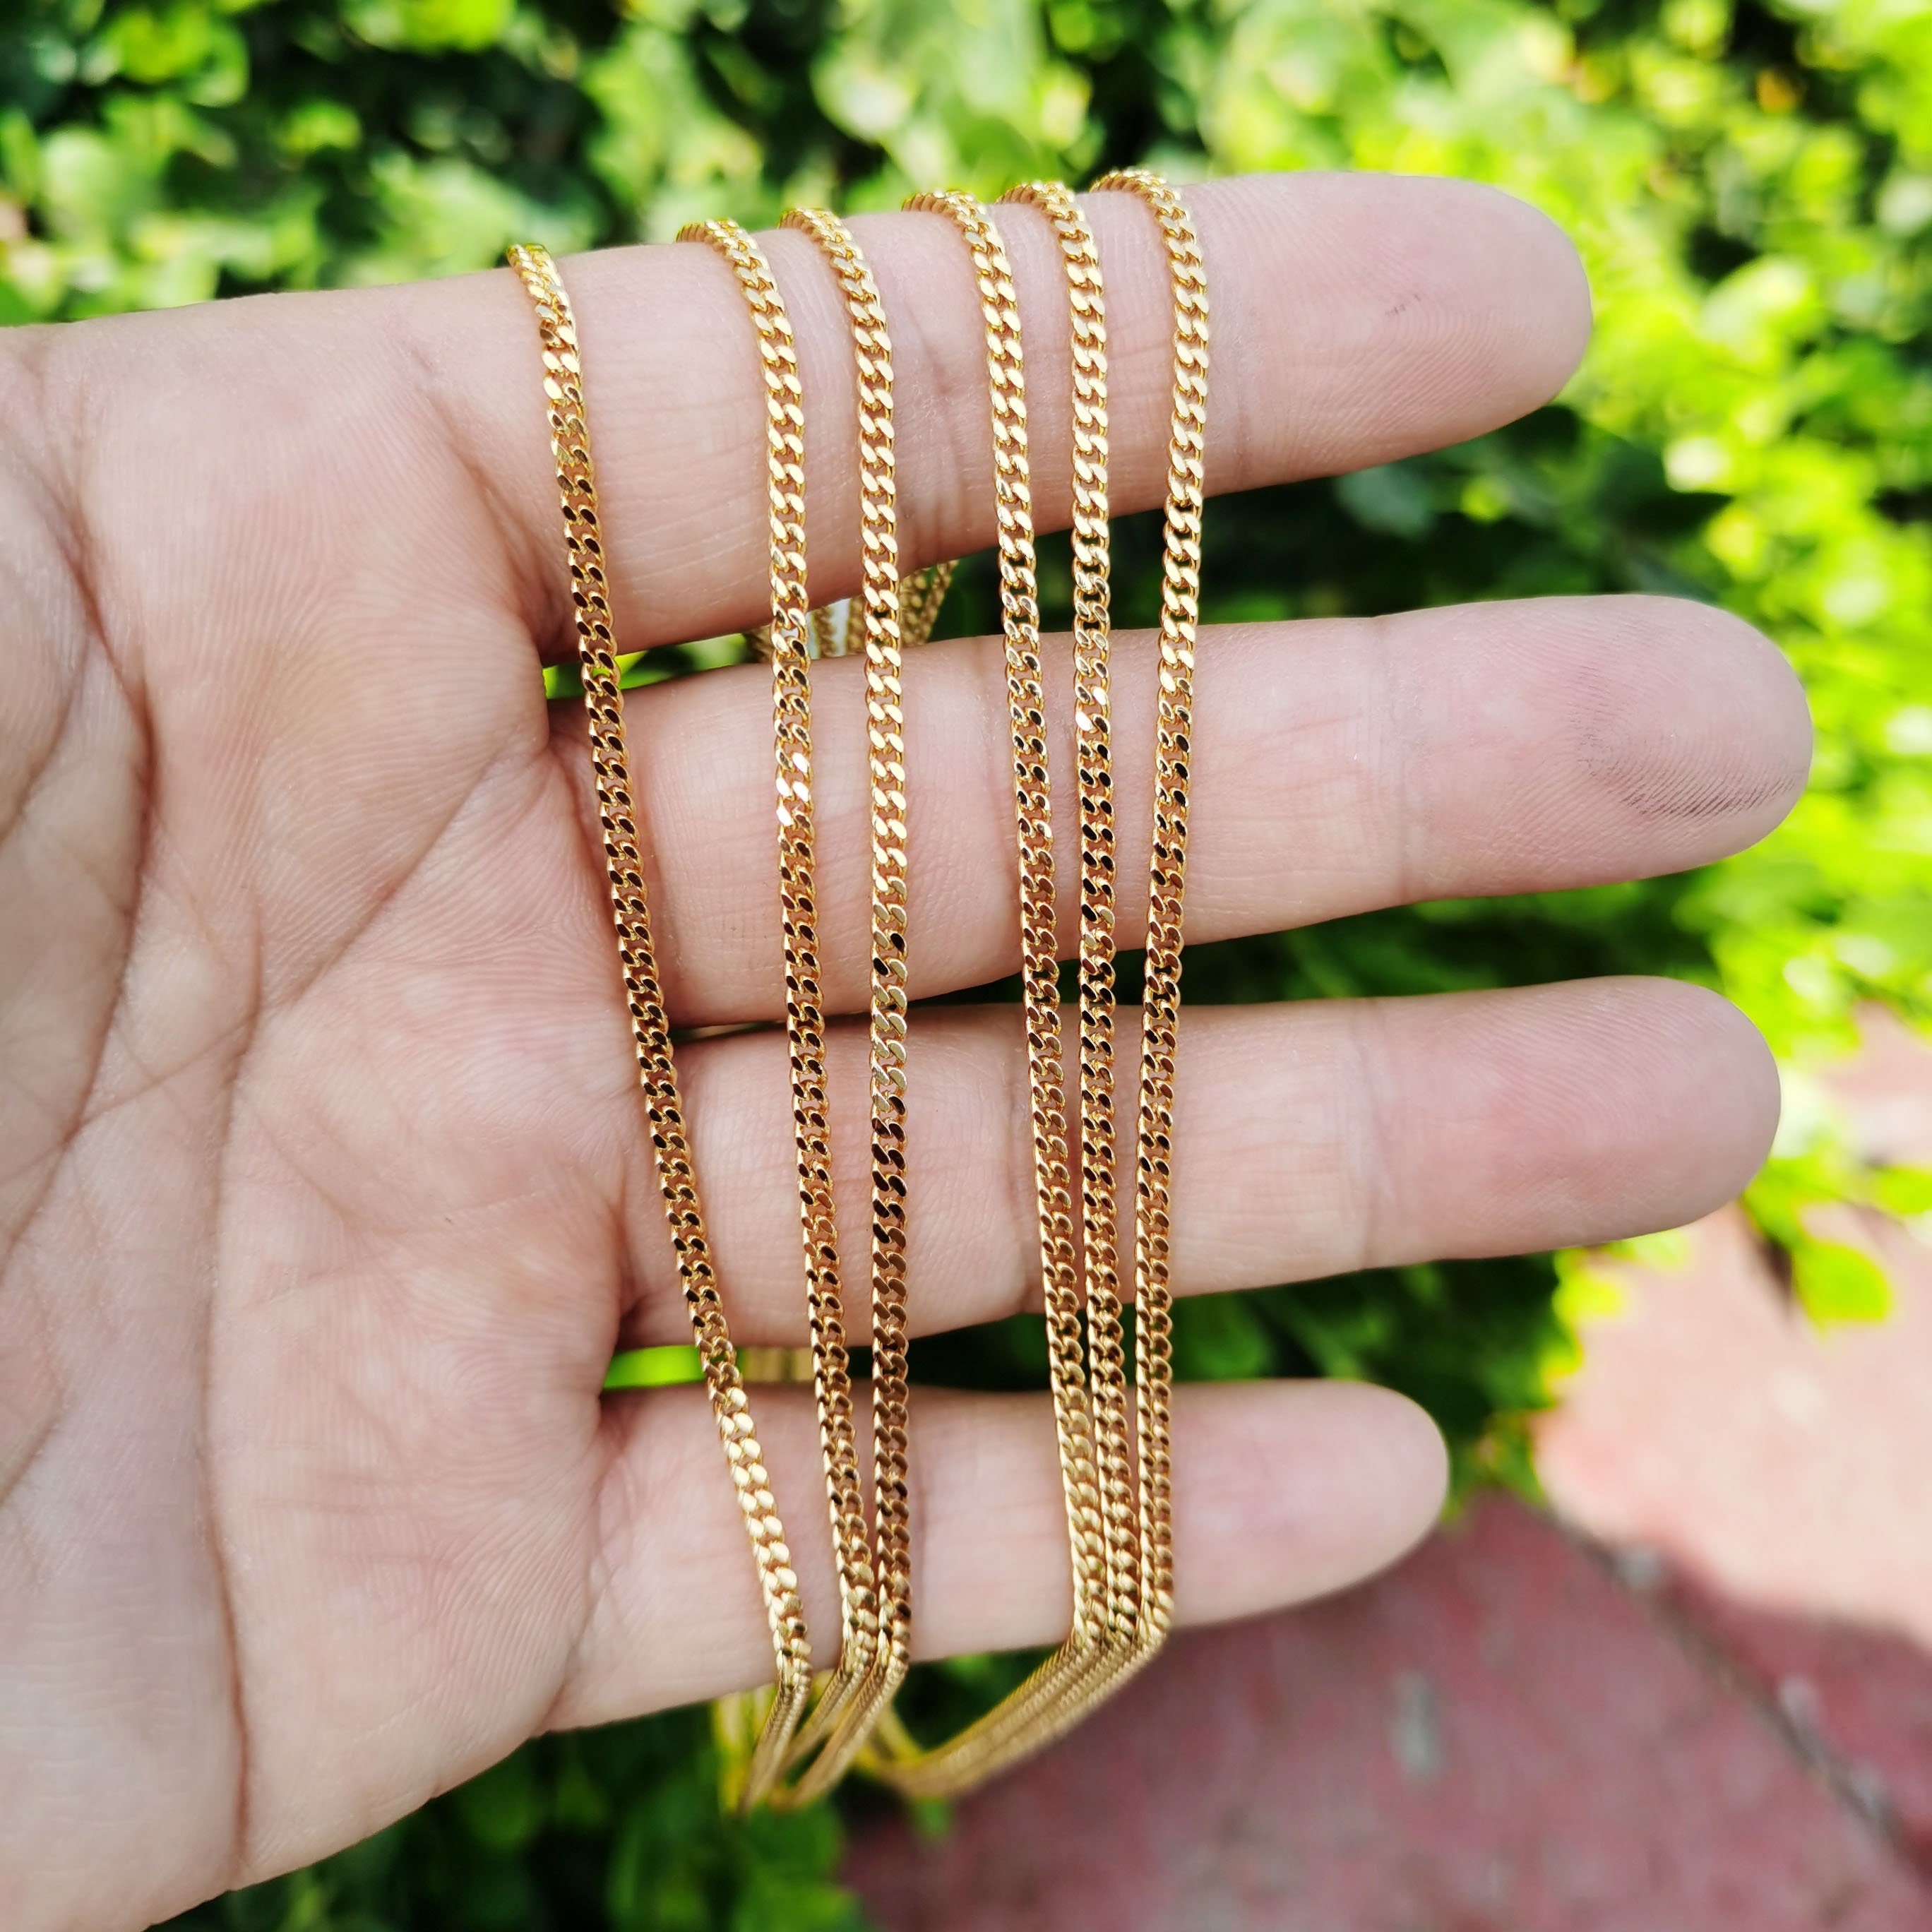 Curb Chain Necklace 14K Gold / 18